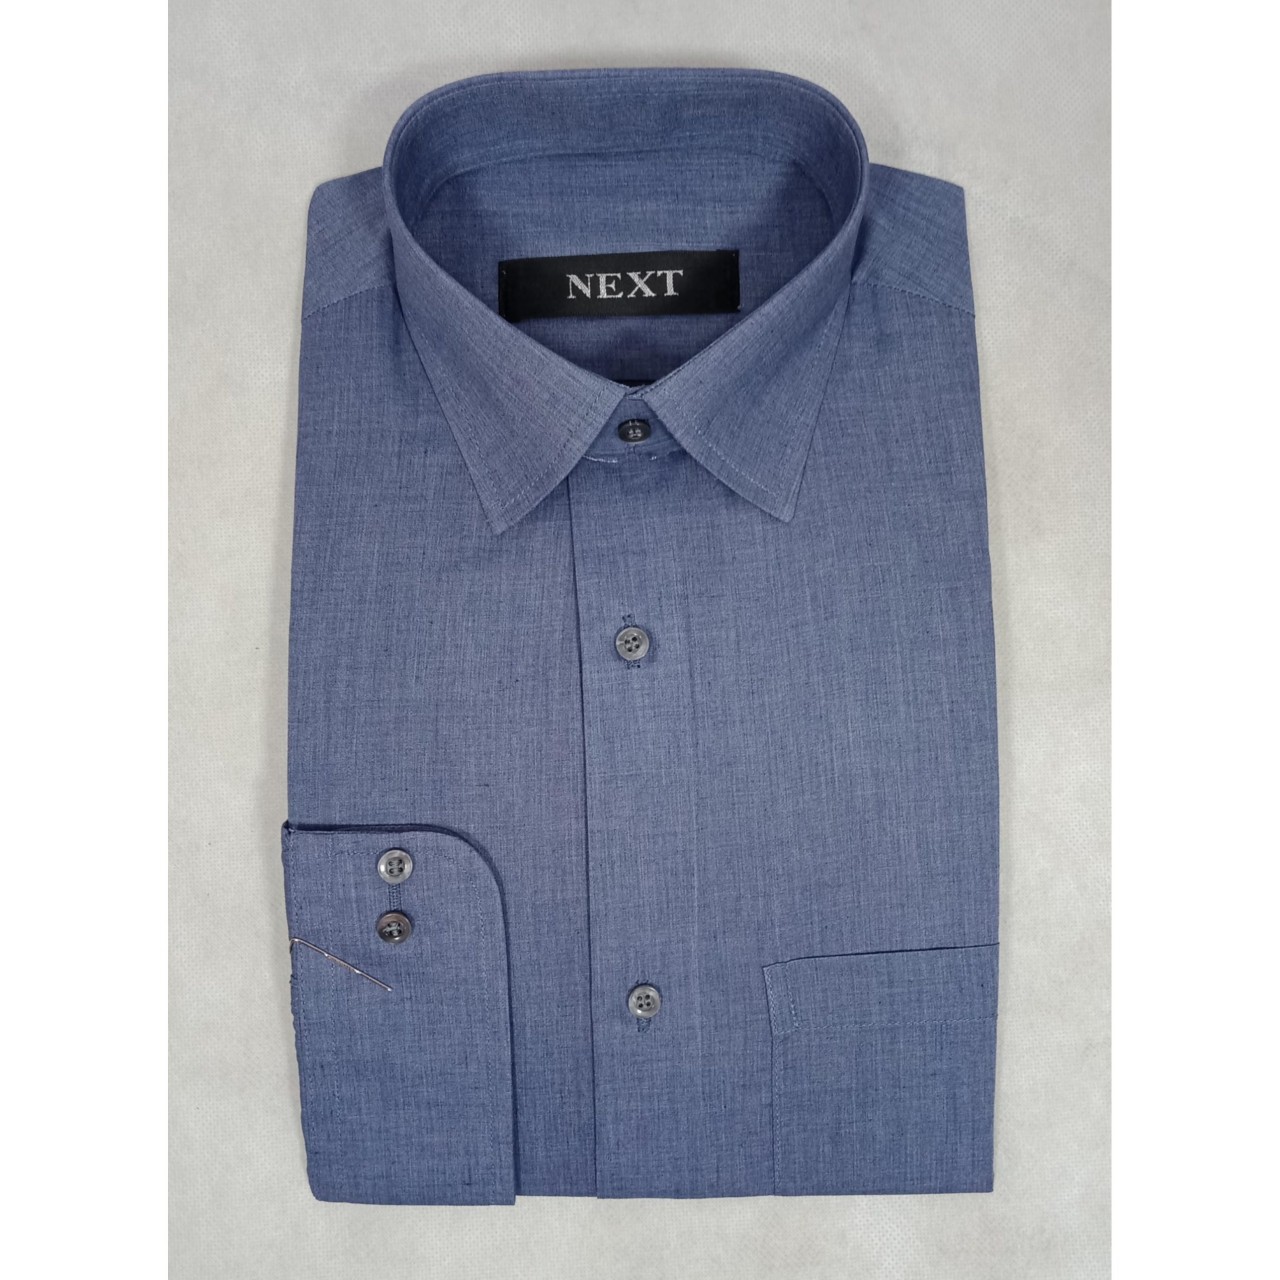 Chambray Formal Shirt For Men - Double Needle Stitching - Light Blue